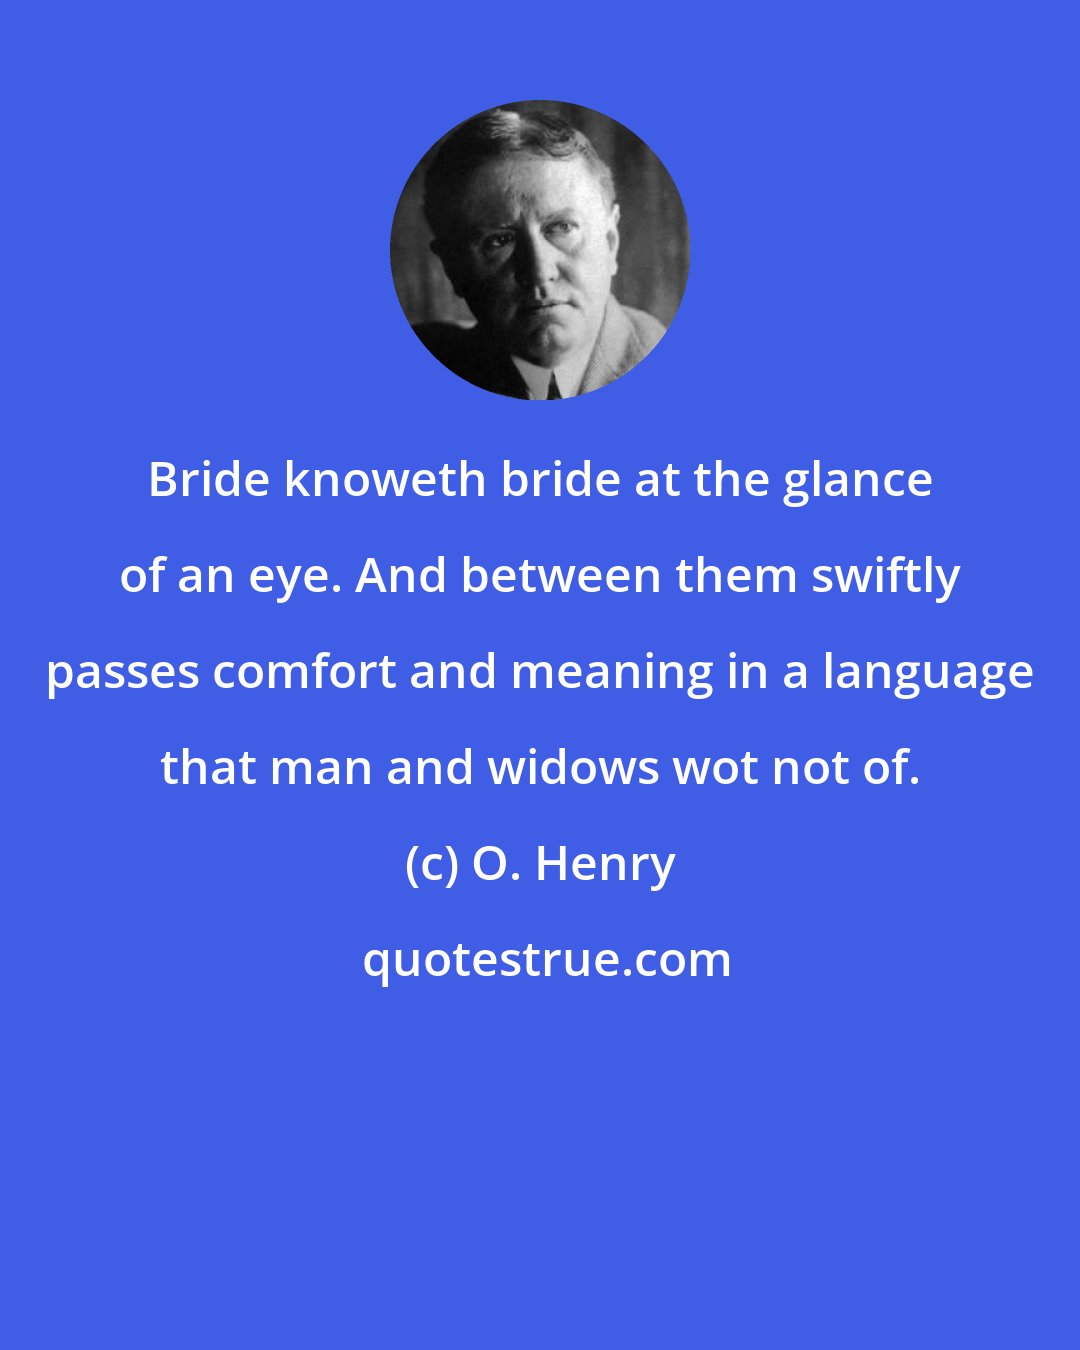 O. Henry: Bride knoweth bride at the glance of an eye. And between them swiftly passes comfort and meaning in a language that man and widows wot not of.